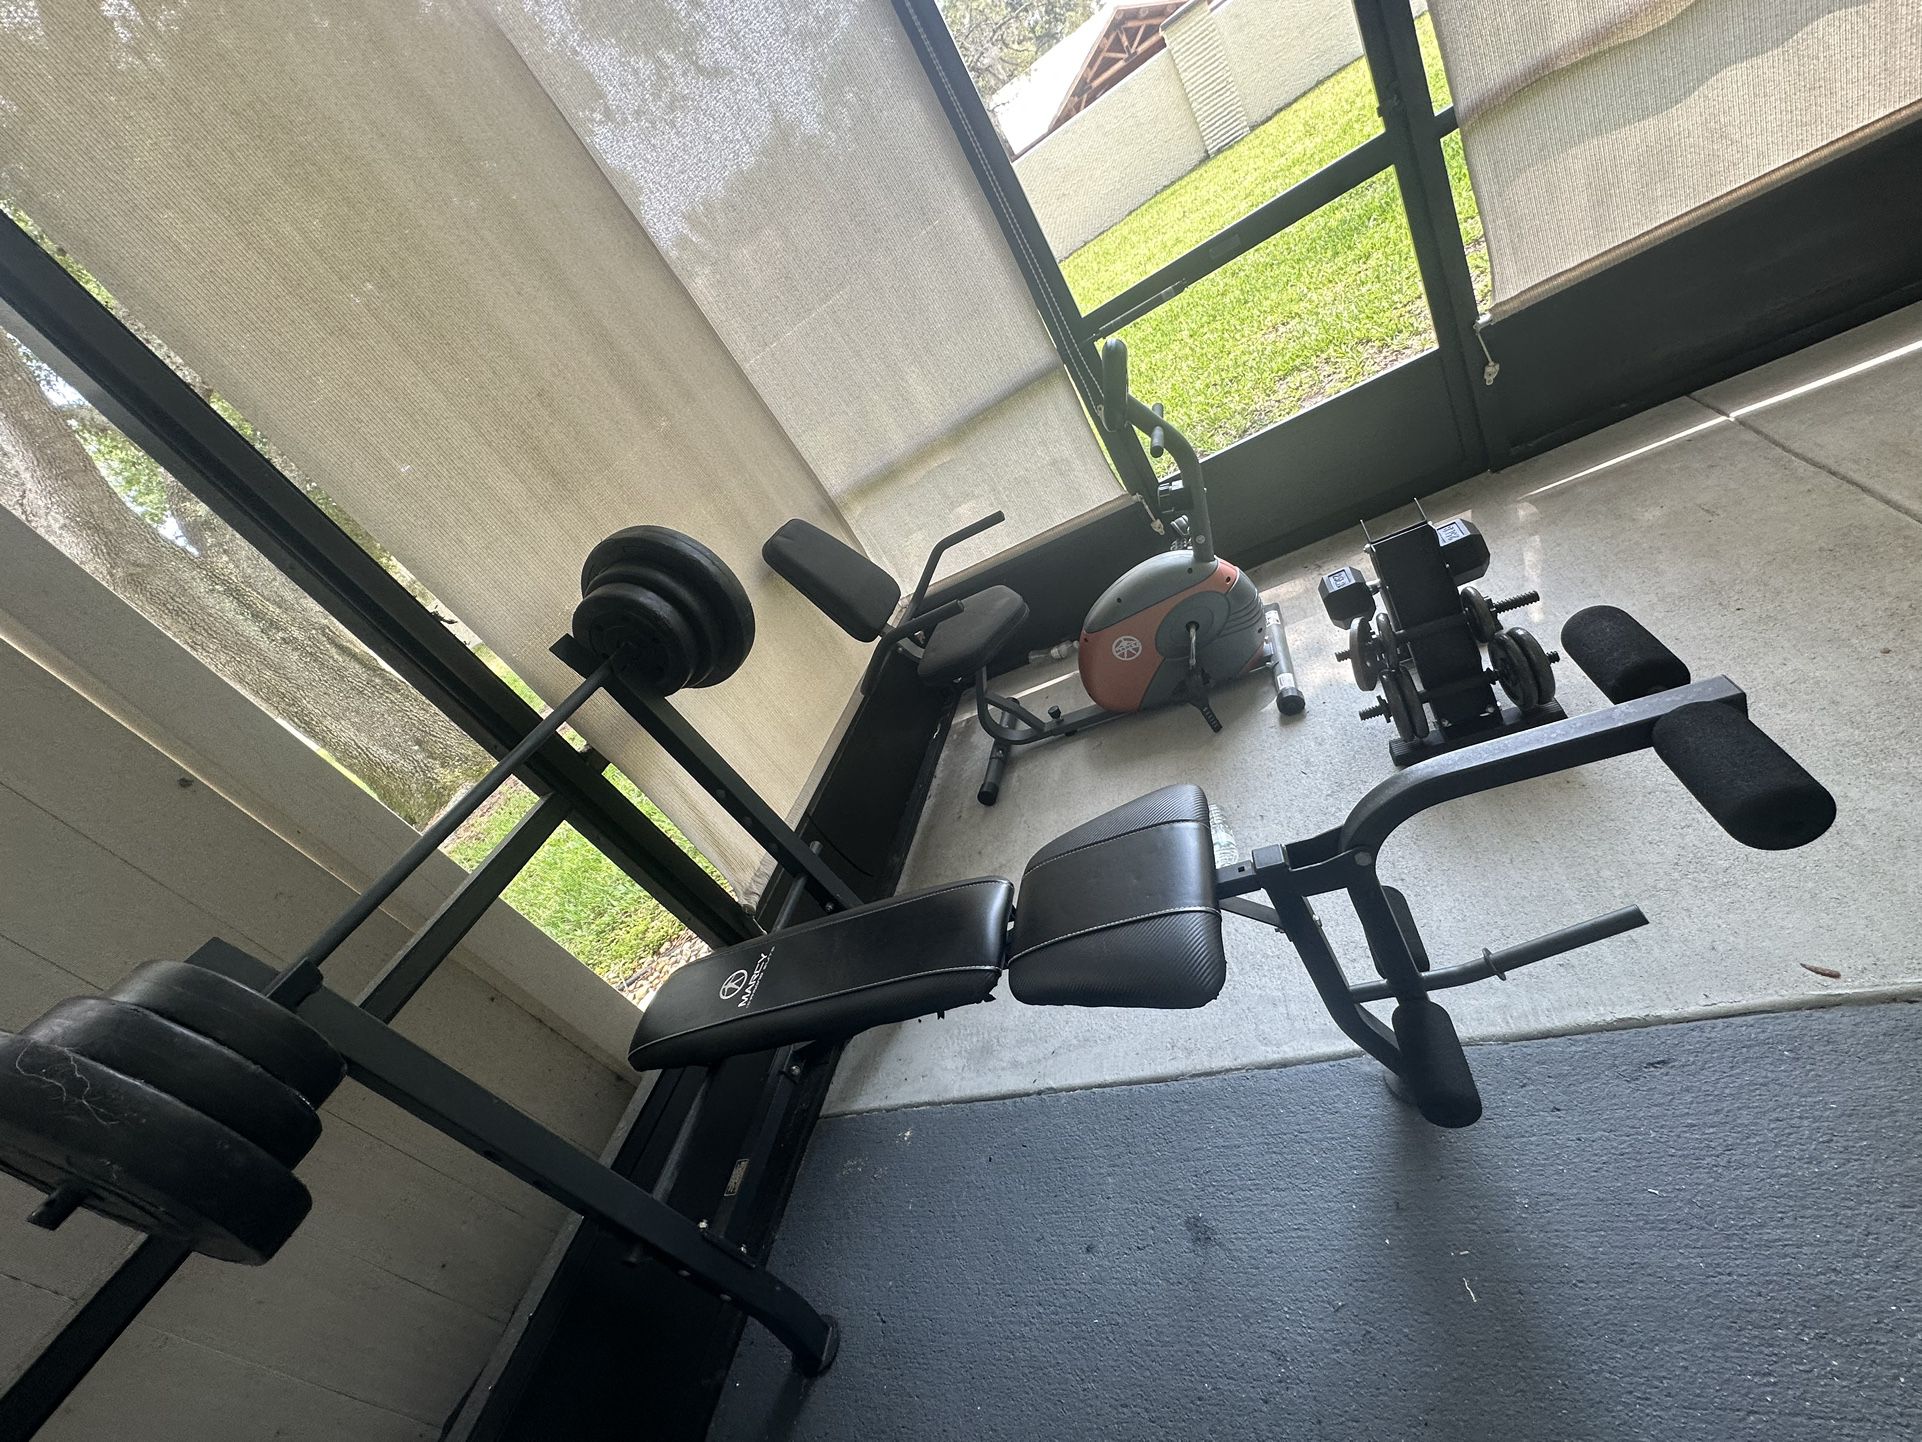 Home Gym & Boxing  Set & Exercise Recumbent bike & Weighted best